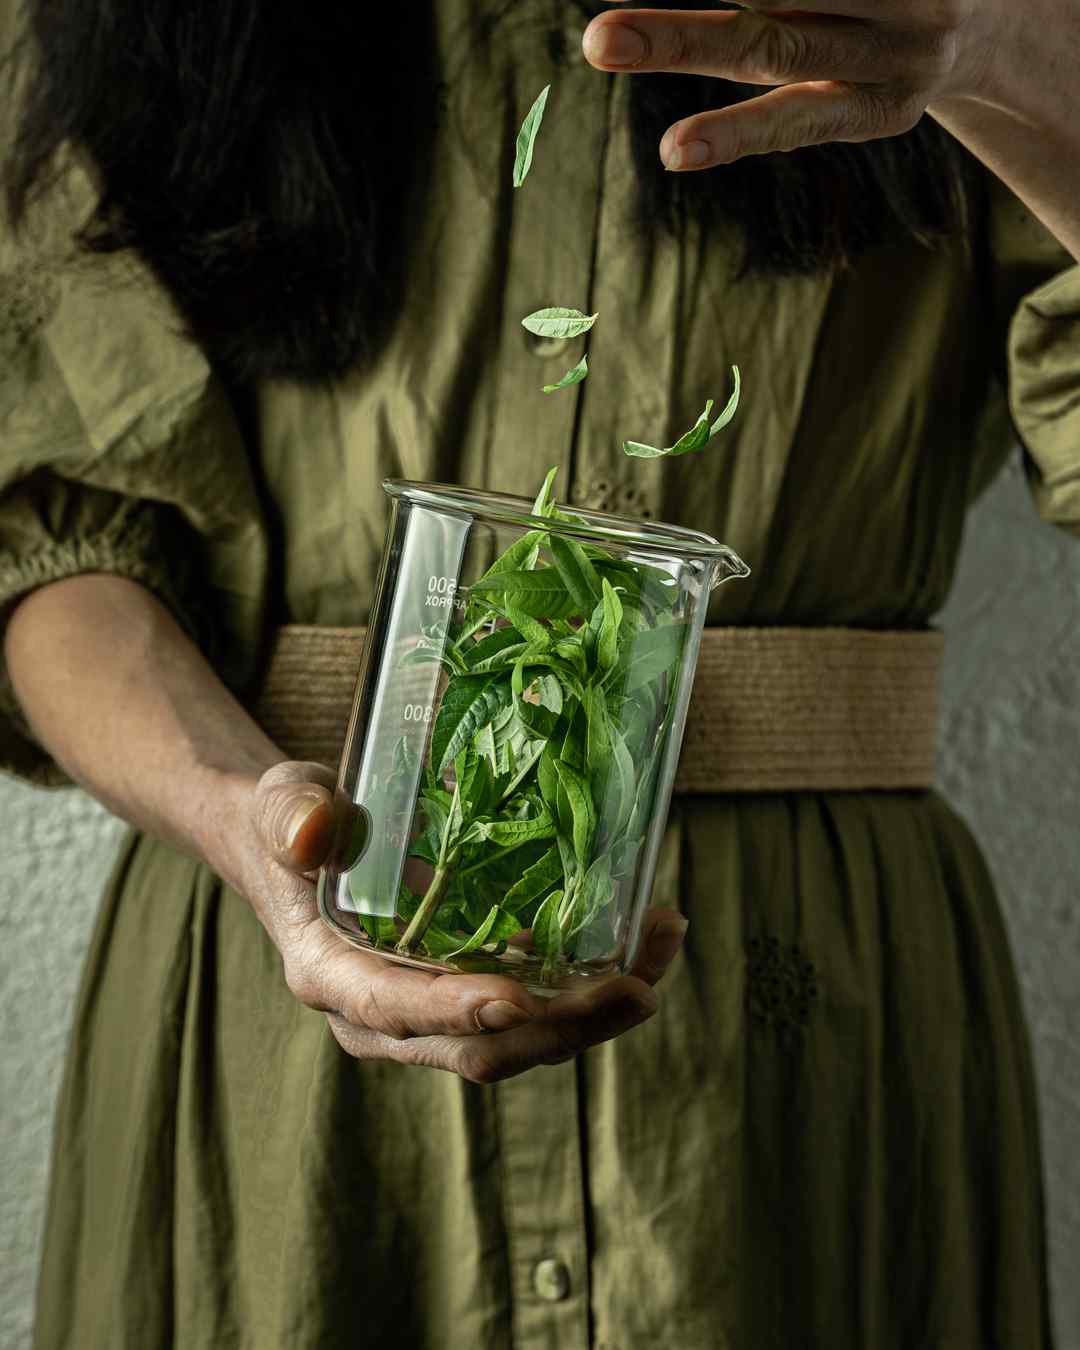 Woman in green dress dropping mint leaves into a glass jar as part of a content marketing shoot produced by YesMore Non Executive Directors for Cambridge Gin Distillery